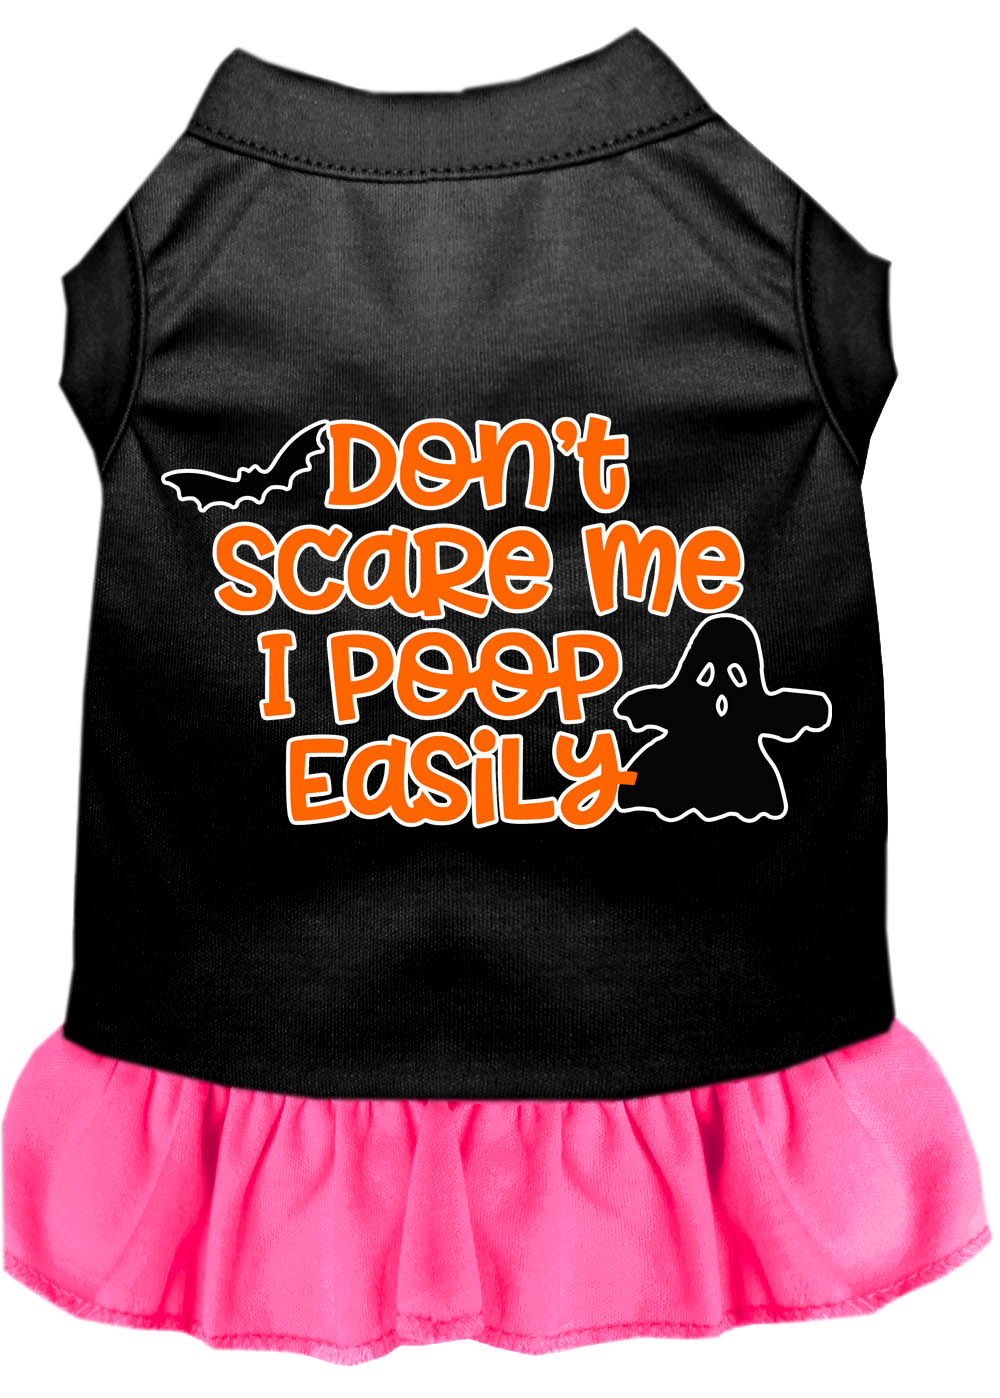 Don't Scare Me, Poops Easily Screen Print Dog Dress Black with Bright Pink XXXL